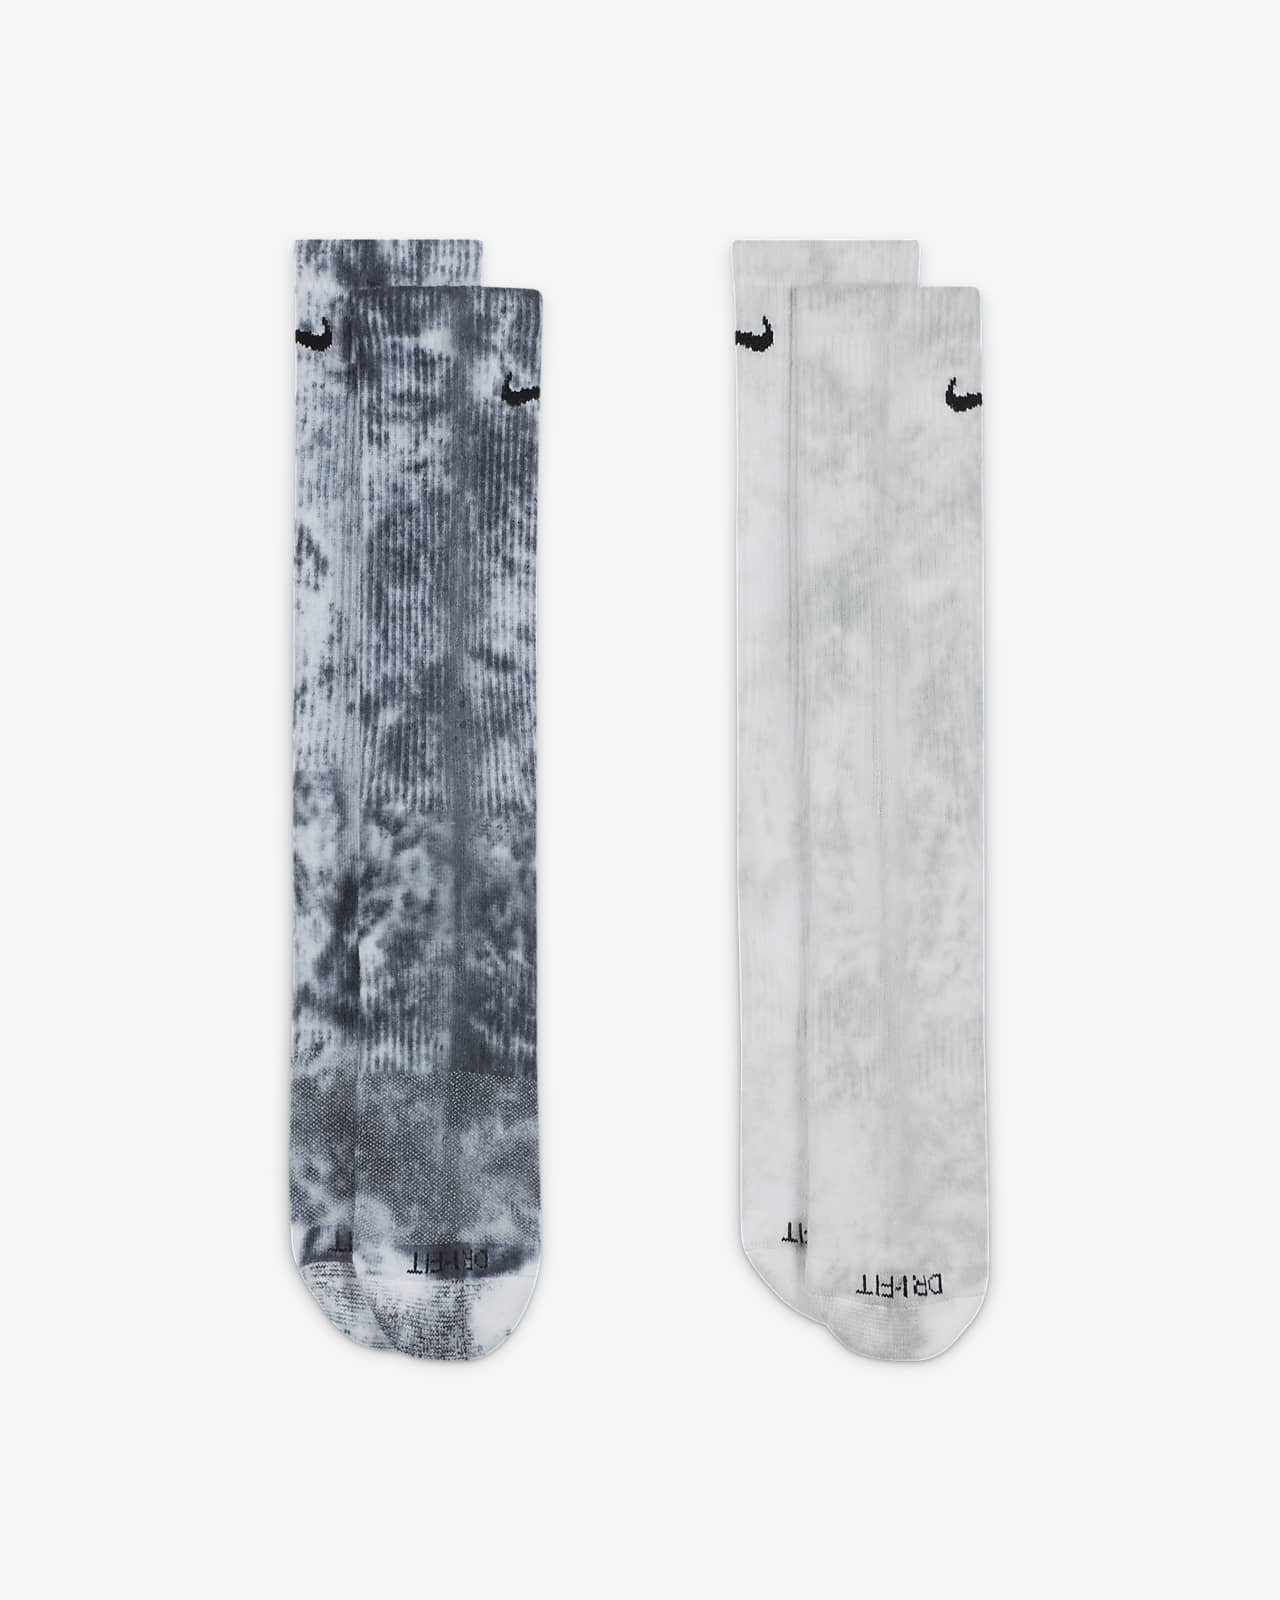 NIKE CHAUSSETTES X2 ANKLE TIE DYE EVERYDAY VERT/MULTICOLORE - CHAUSSETTE  HOMME